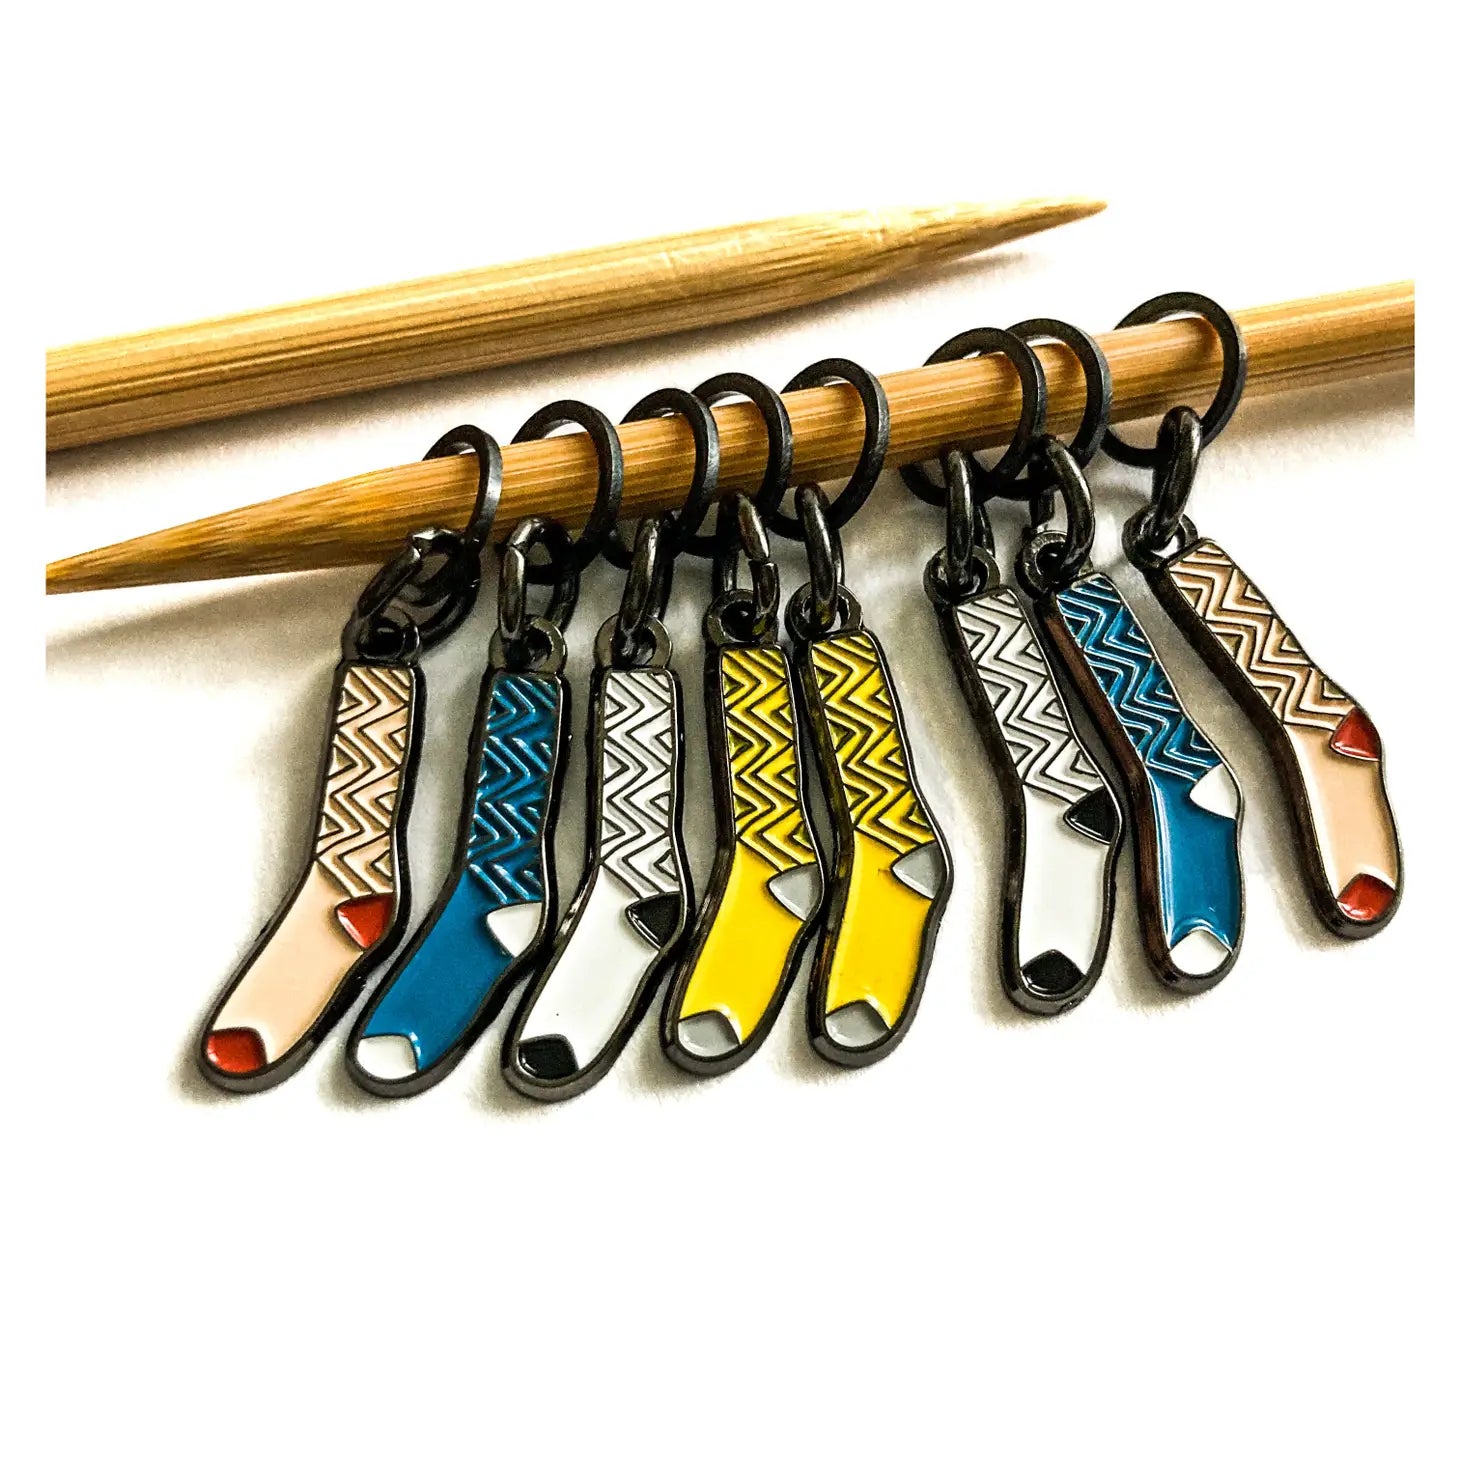 Firefly Notes Stitch Markers